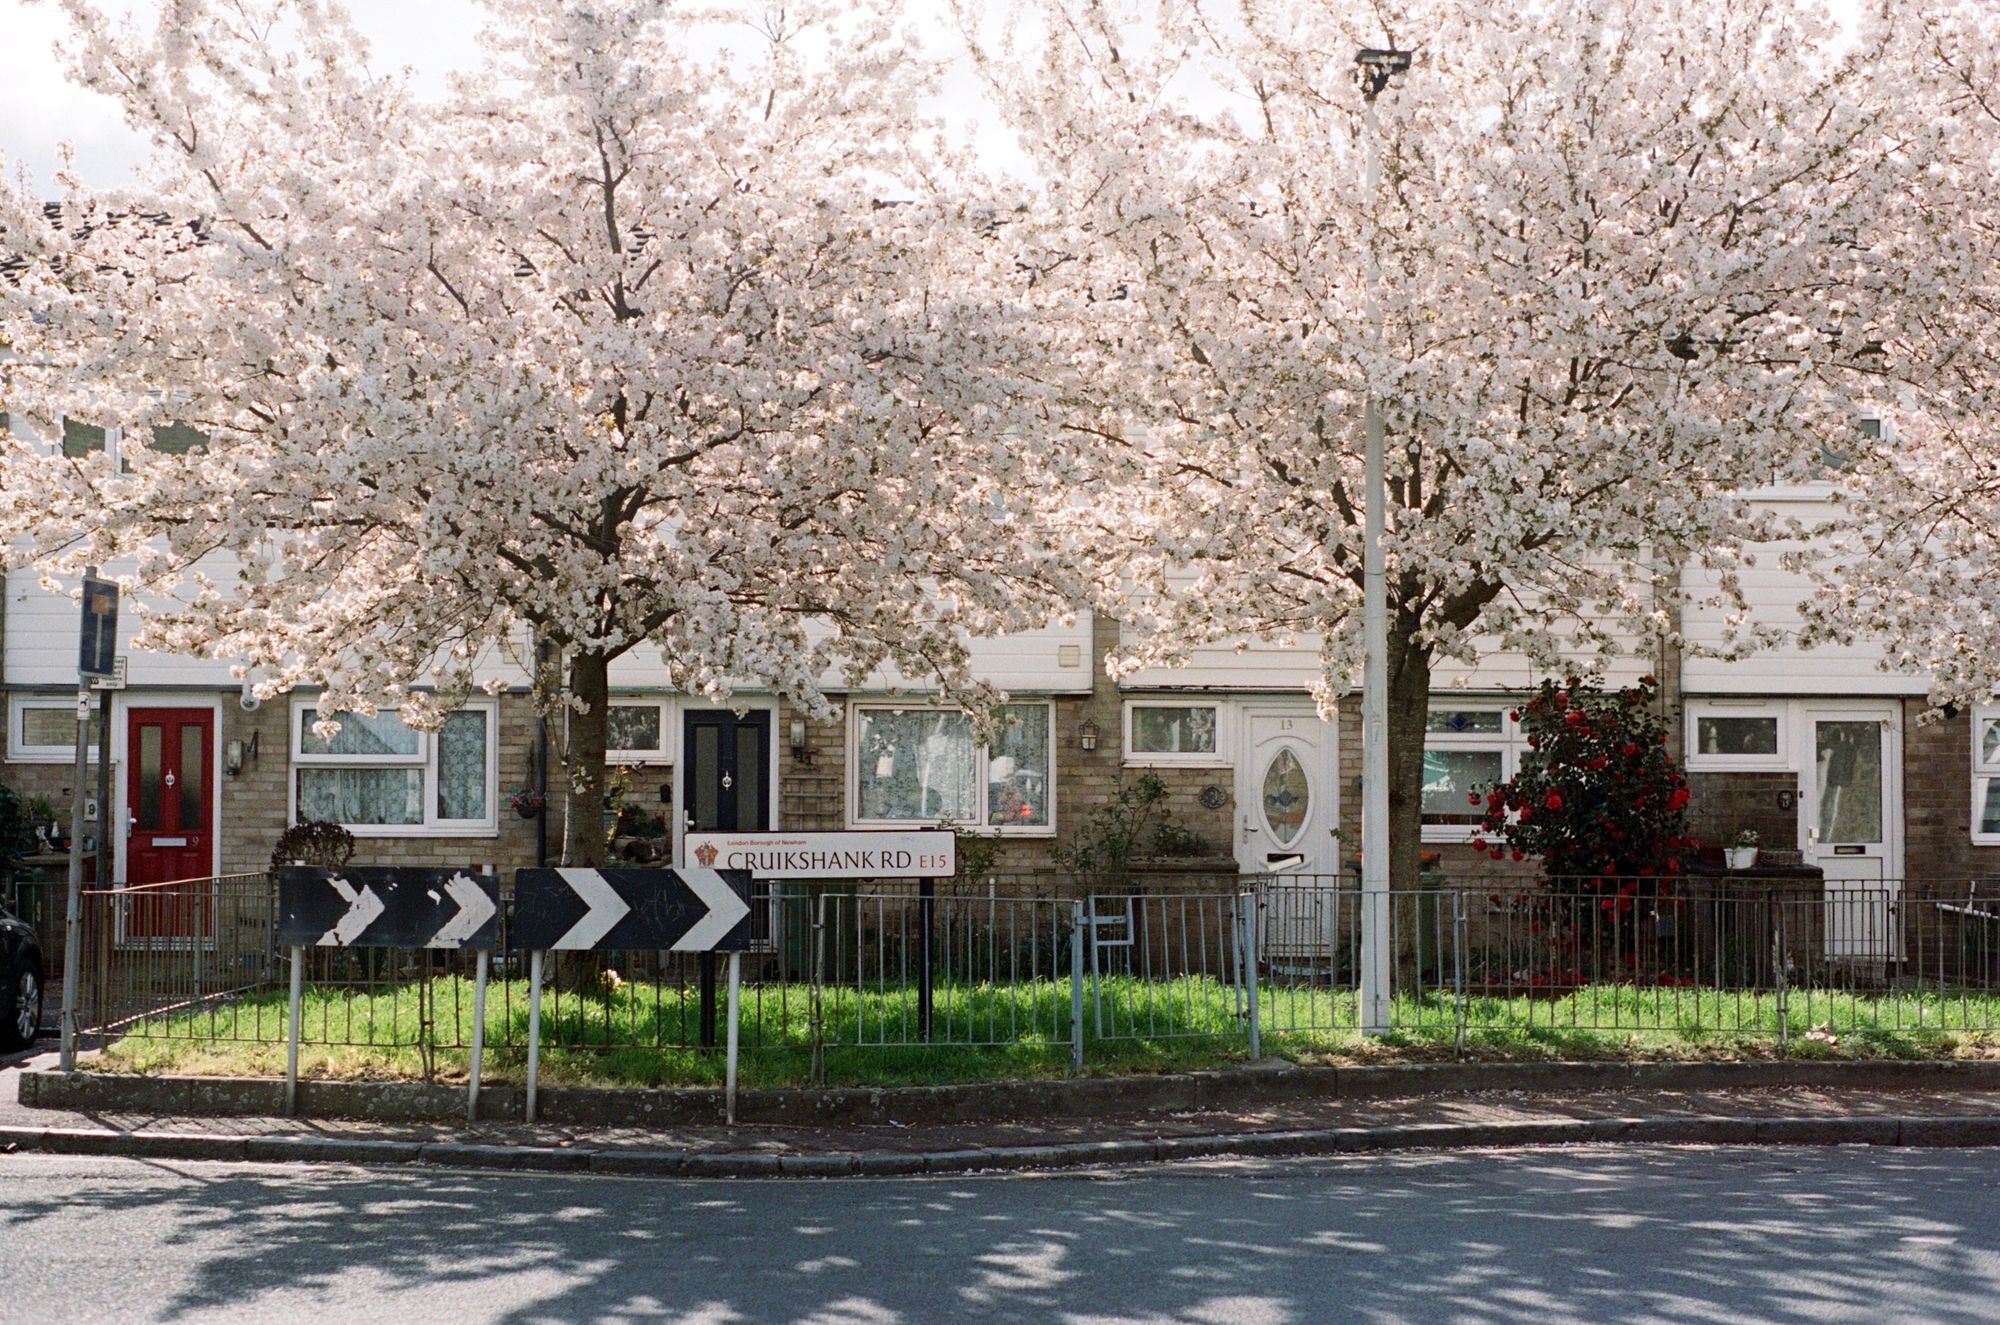 A street, Cruikshank Road, with a row of terraced houses, a narrow pavement, and a fenced off green area. Two trees are in a full and vivid white blossom which is lit from behind by the sun in an almost monastic glory.